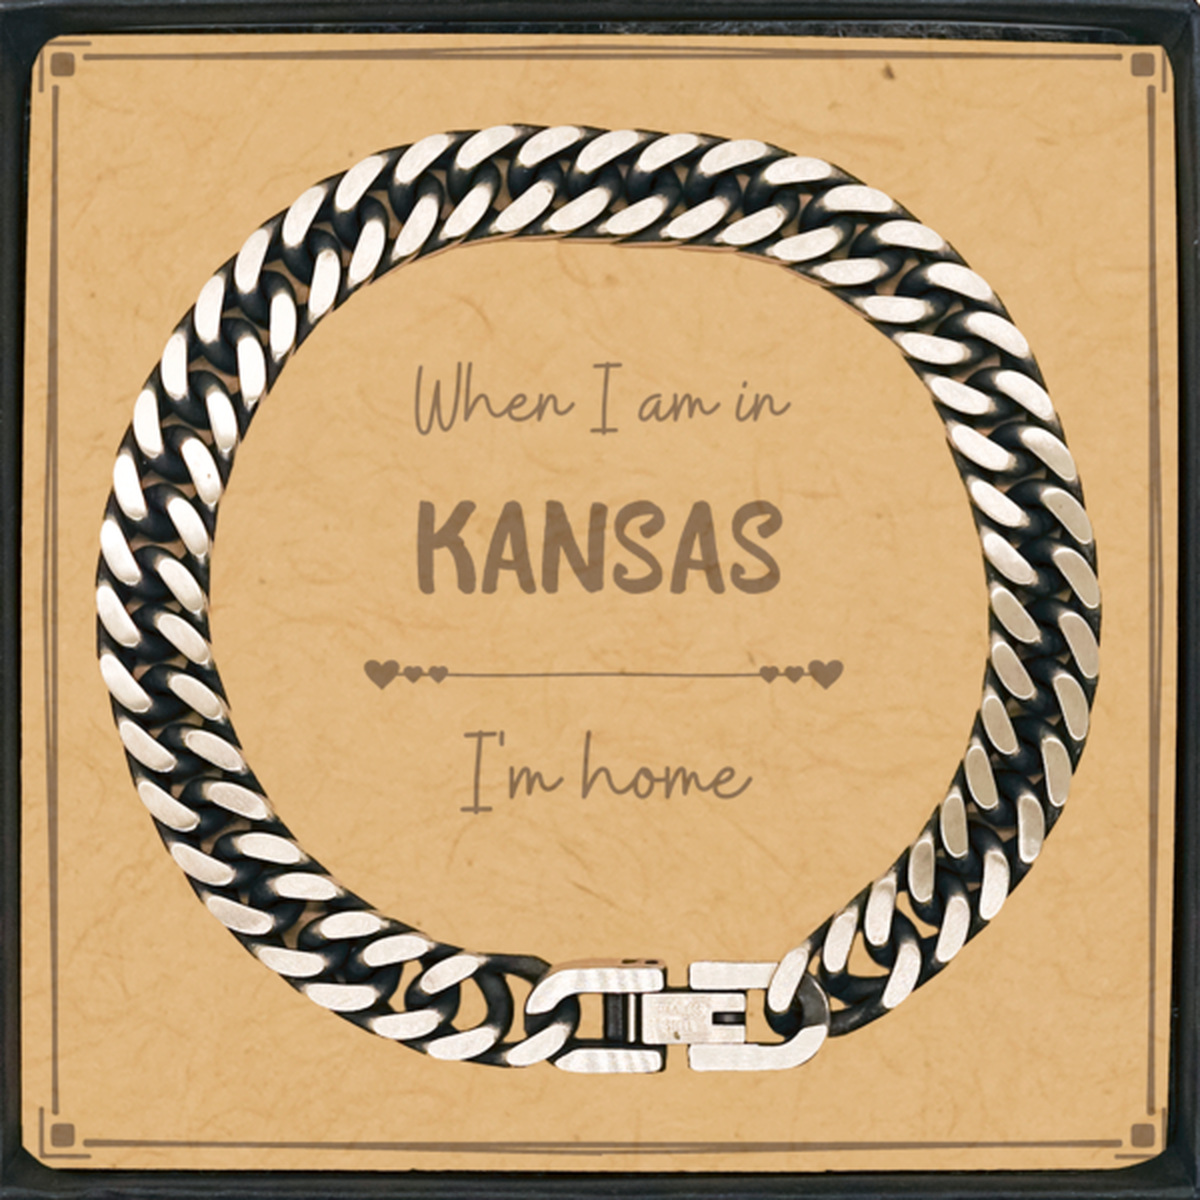 When I am in Kansas I'm home Cuban Link Chain Bracelet, Message Card Gifts For Kansas, State Kansas Birthday Gifts for Friends Coworker